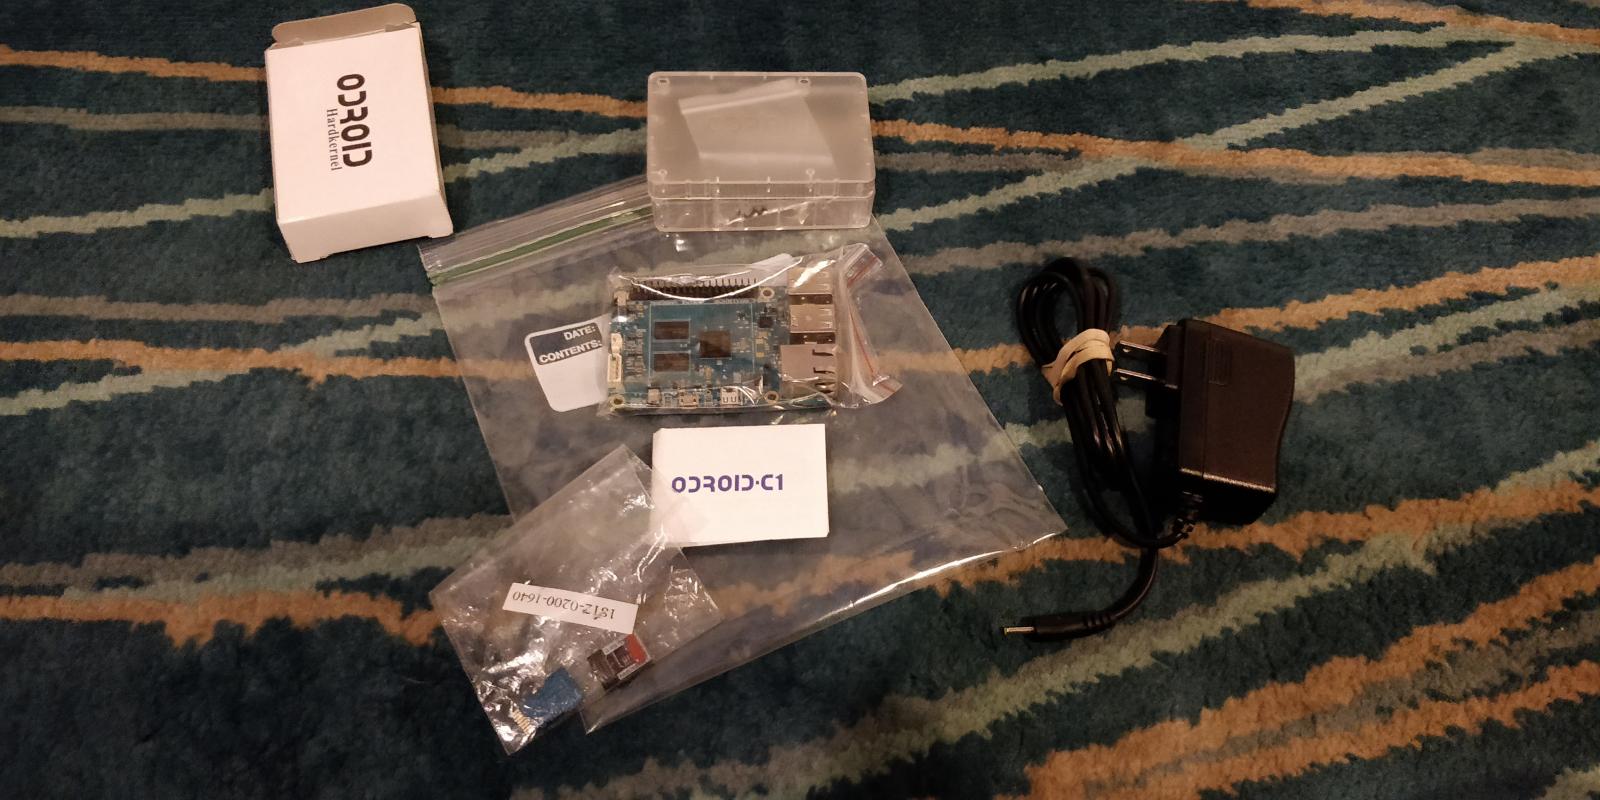 For sale Odroid C-1